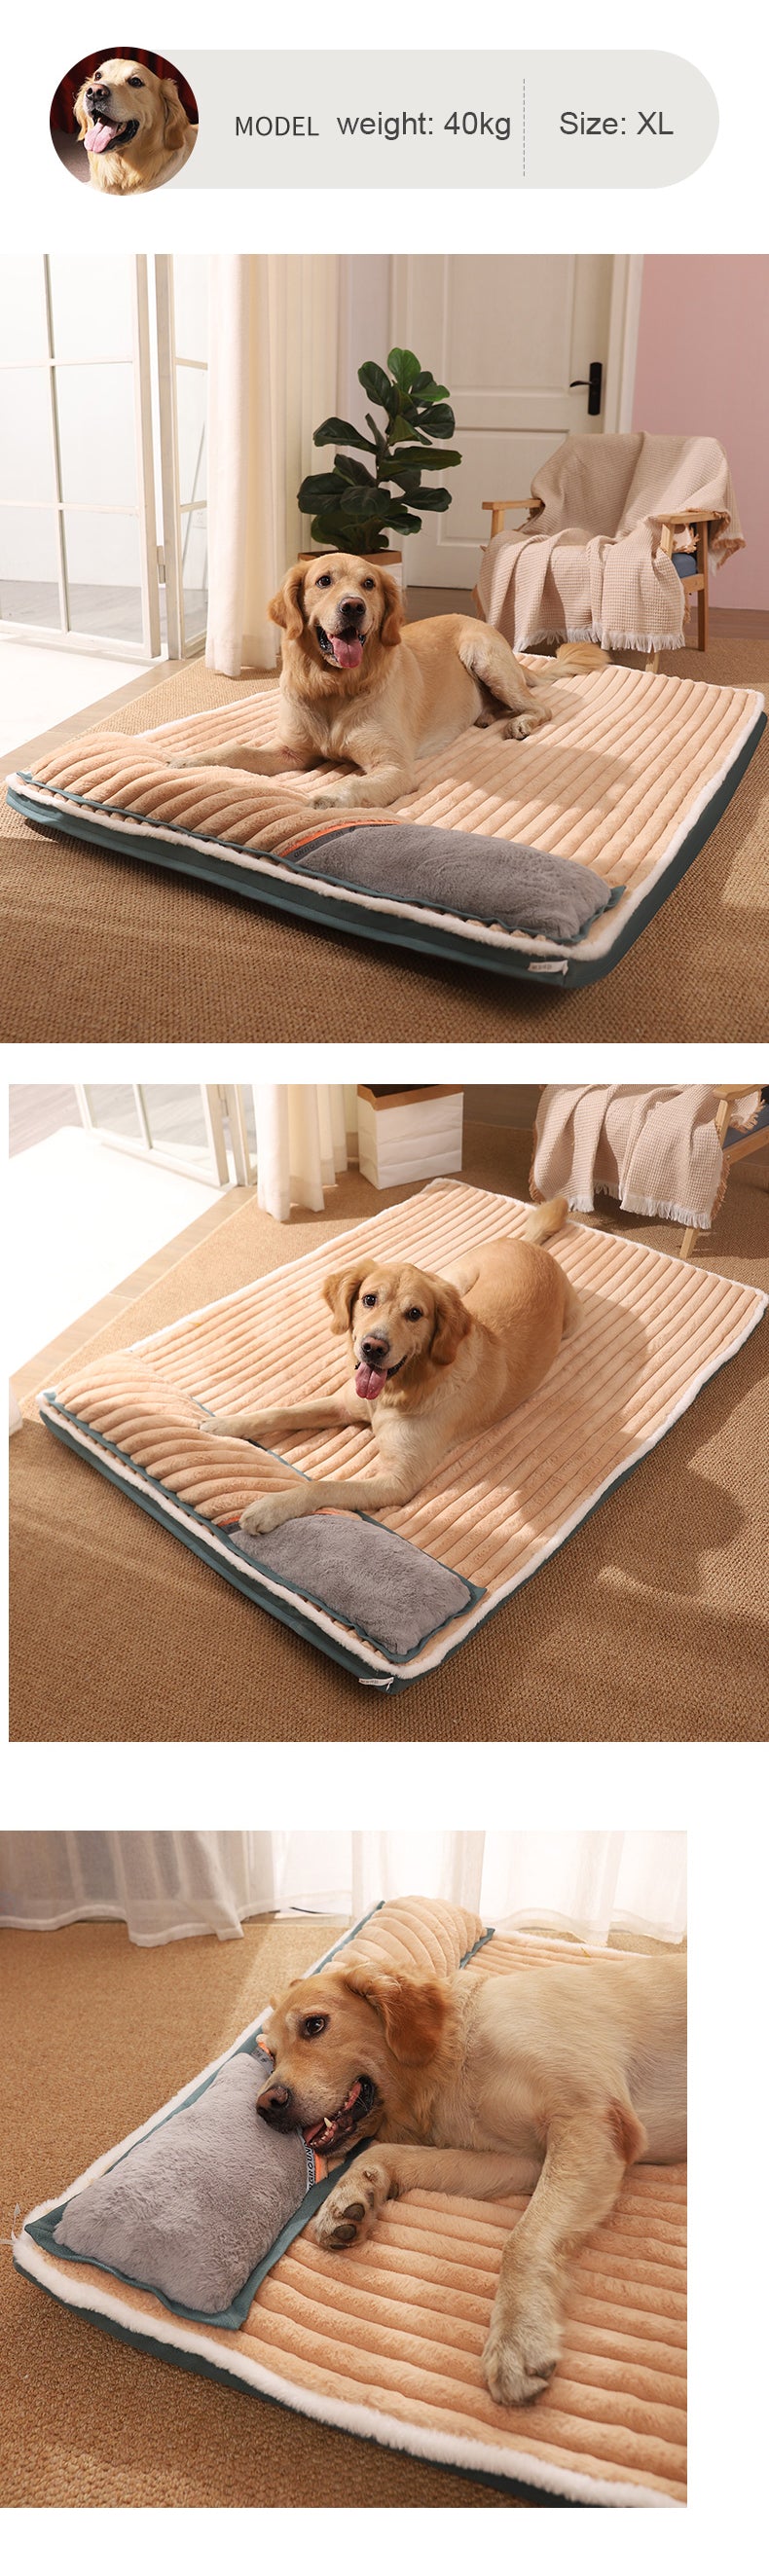 HOOPET Dog Bed Padded Cushion for Small & Big Dogs Sleeping Bed.